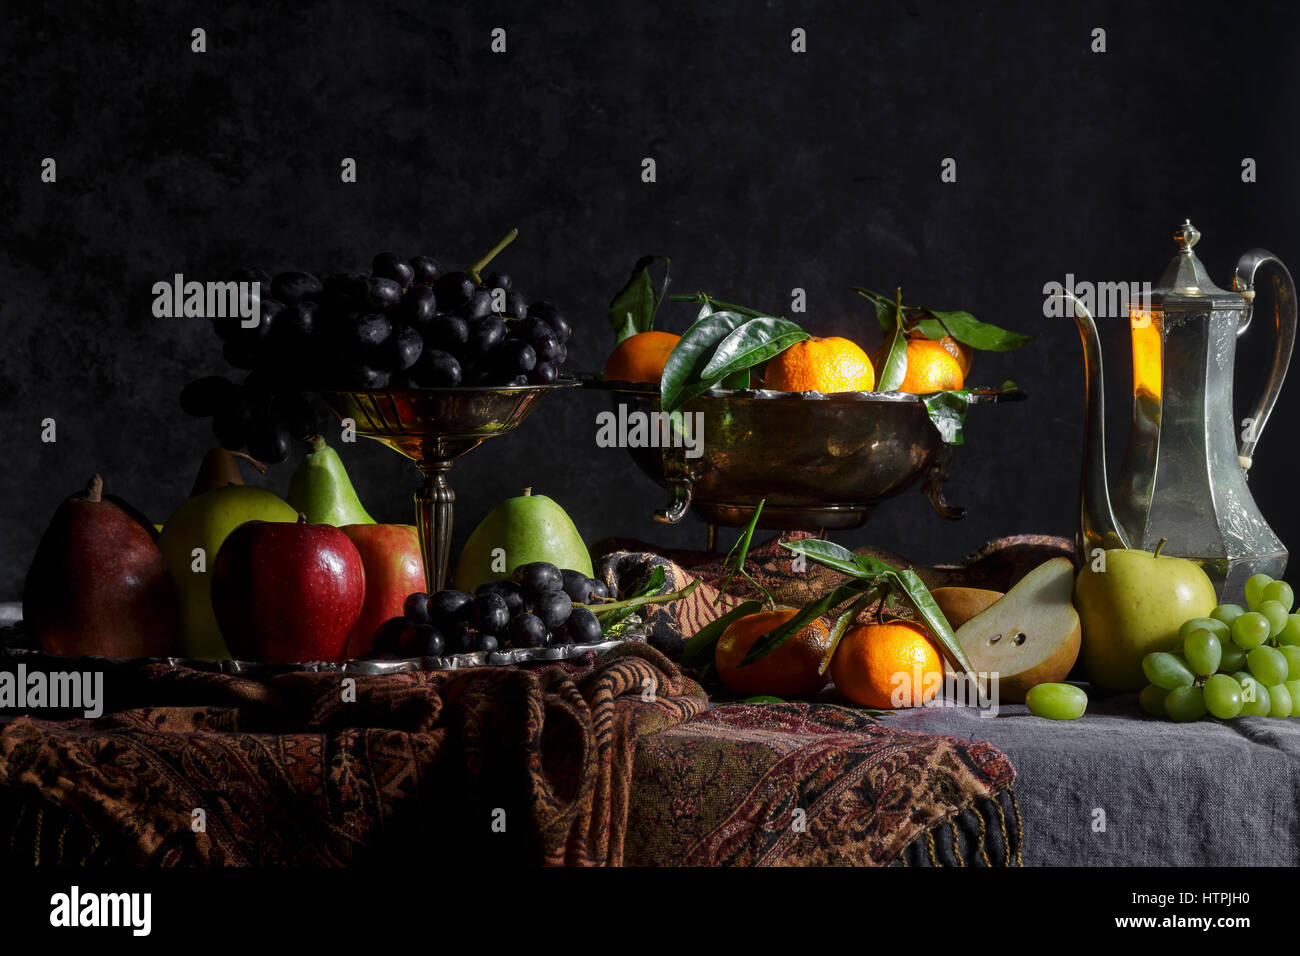 Fruit still life in the style of old masters paintings Stock Photo